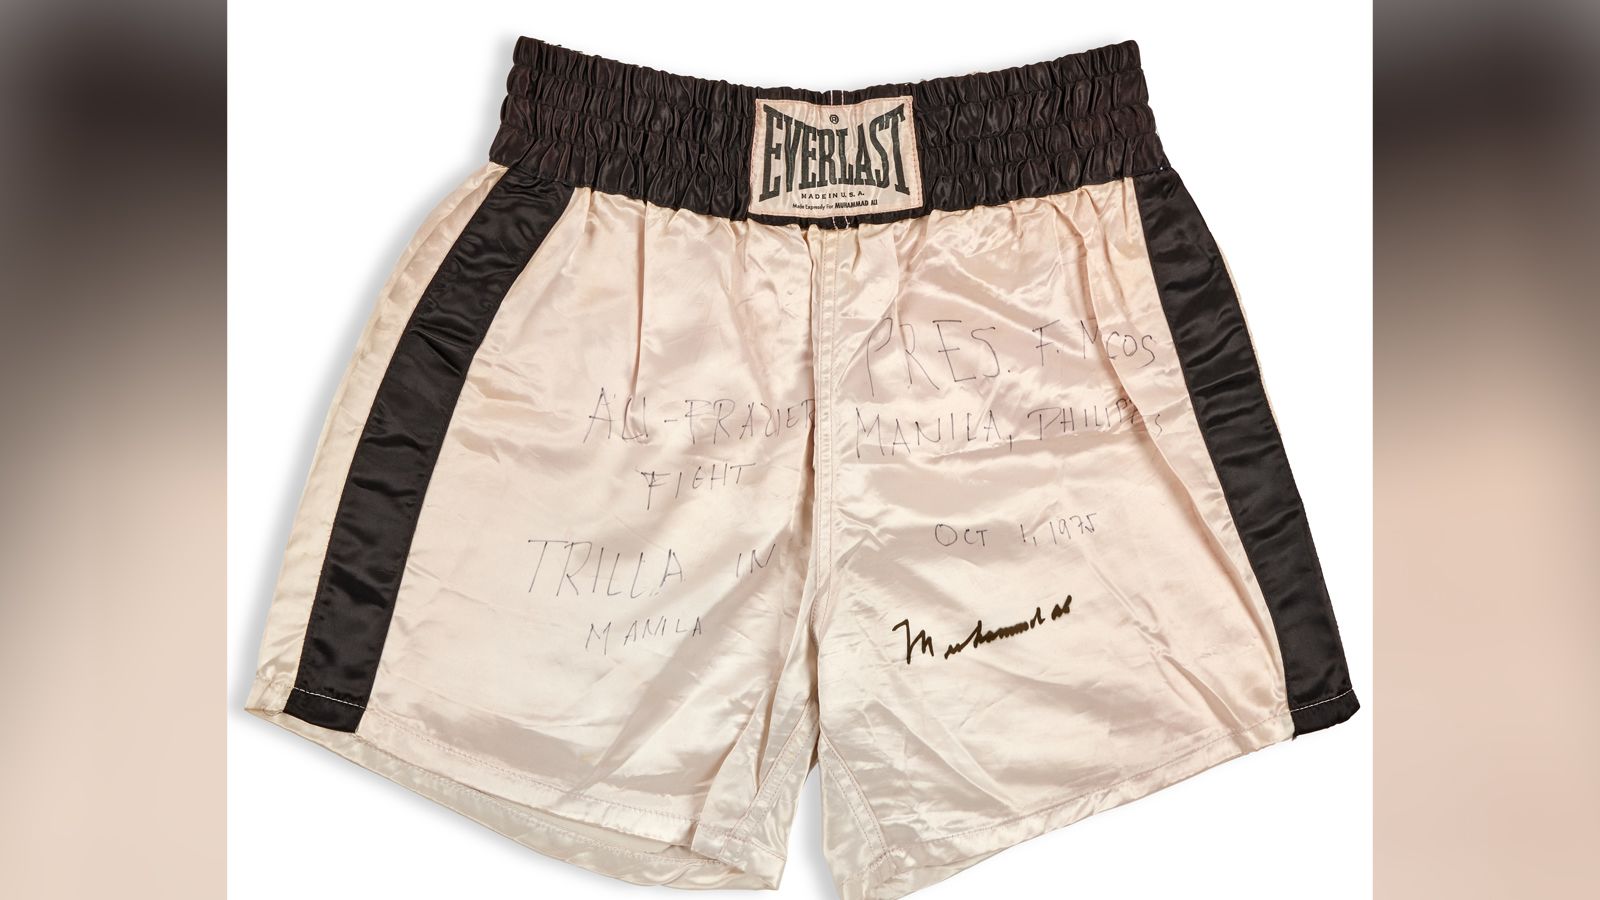 Muhammad Ali's signed trunks are on auction until April 12.